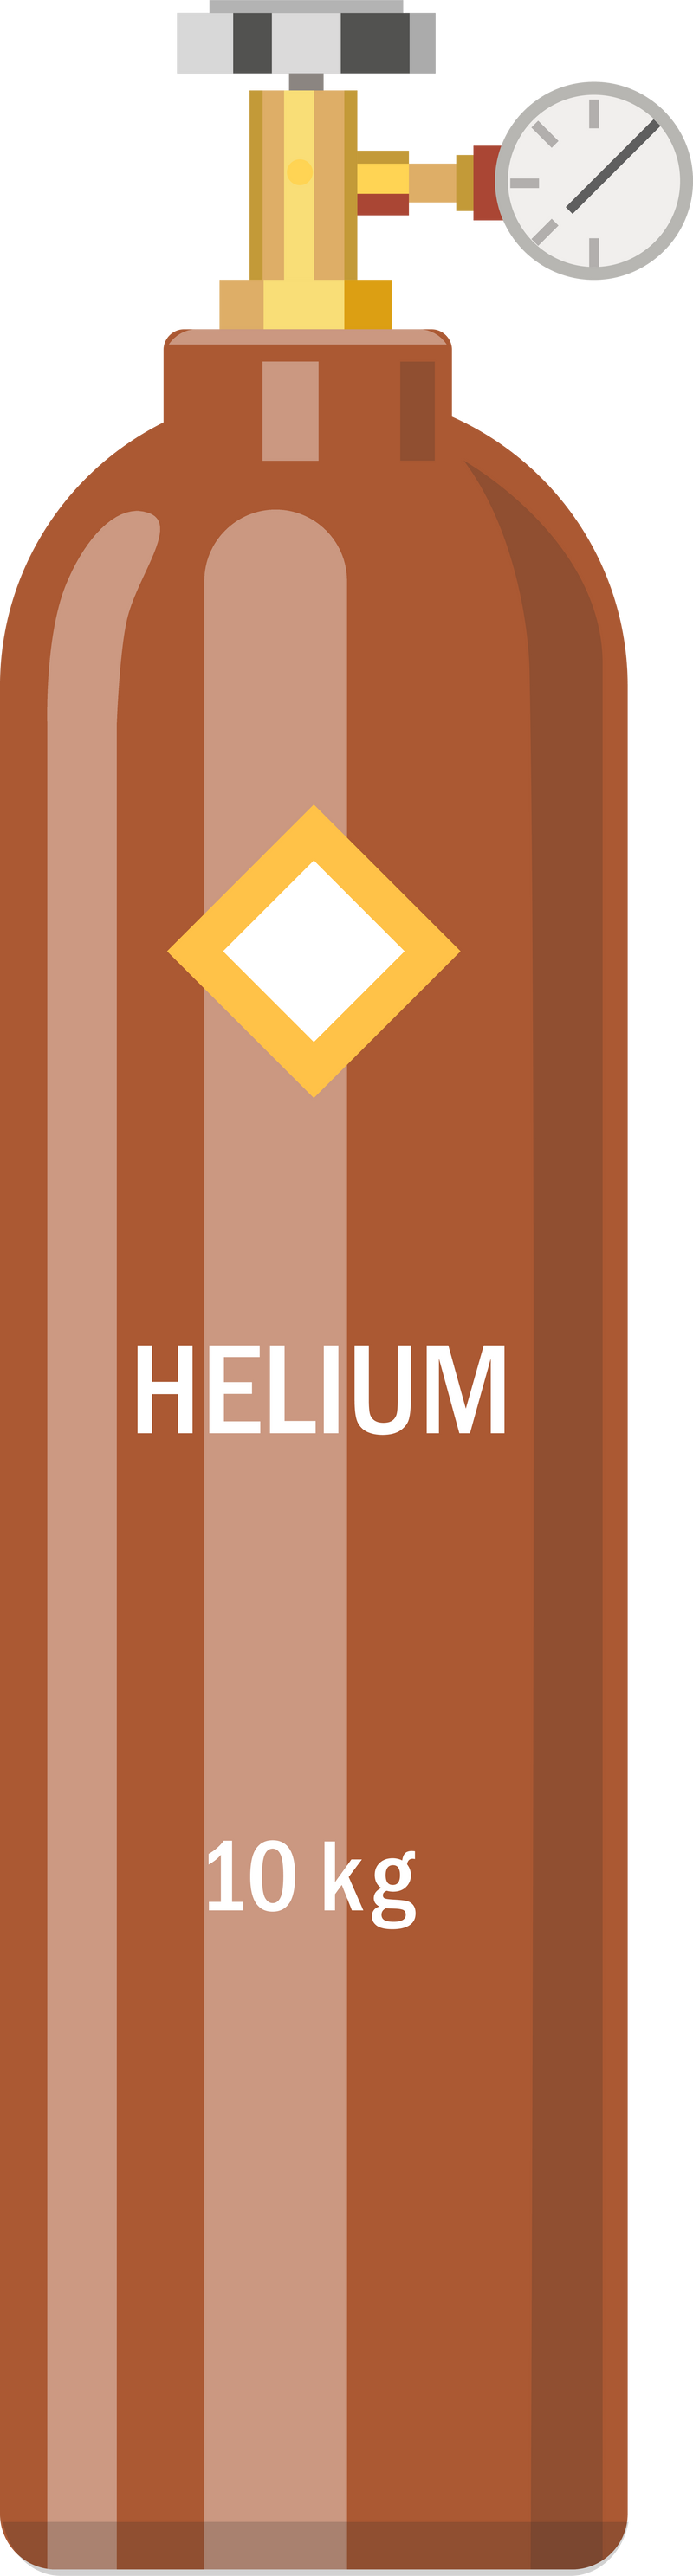 Helium gas storage cylinders flat icon. Nitrogen, carbon dioxide, helium tanks and containers isolated vector illustration